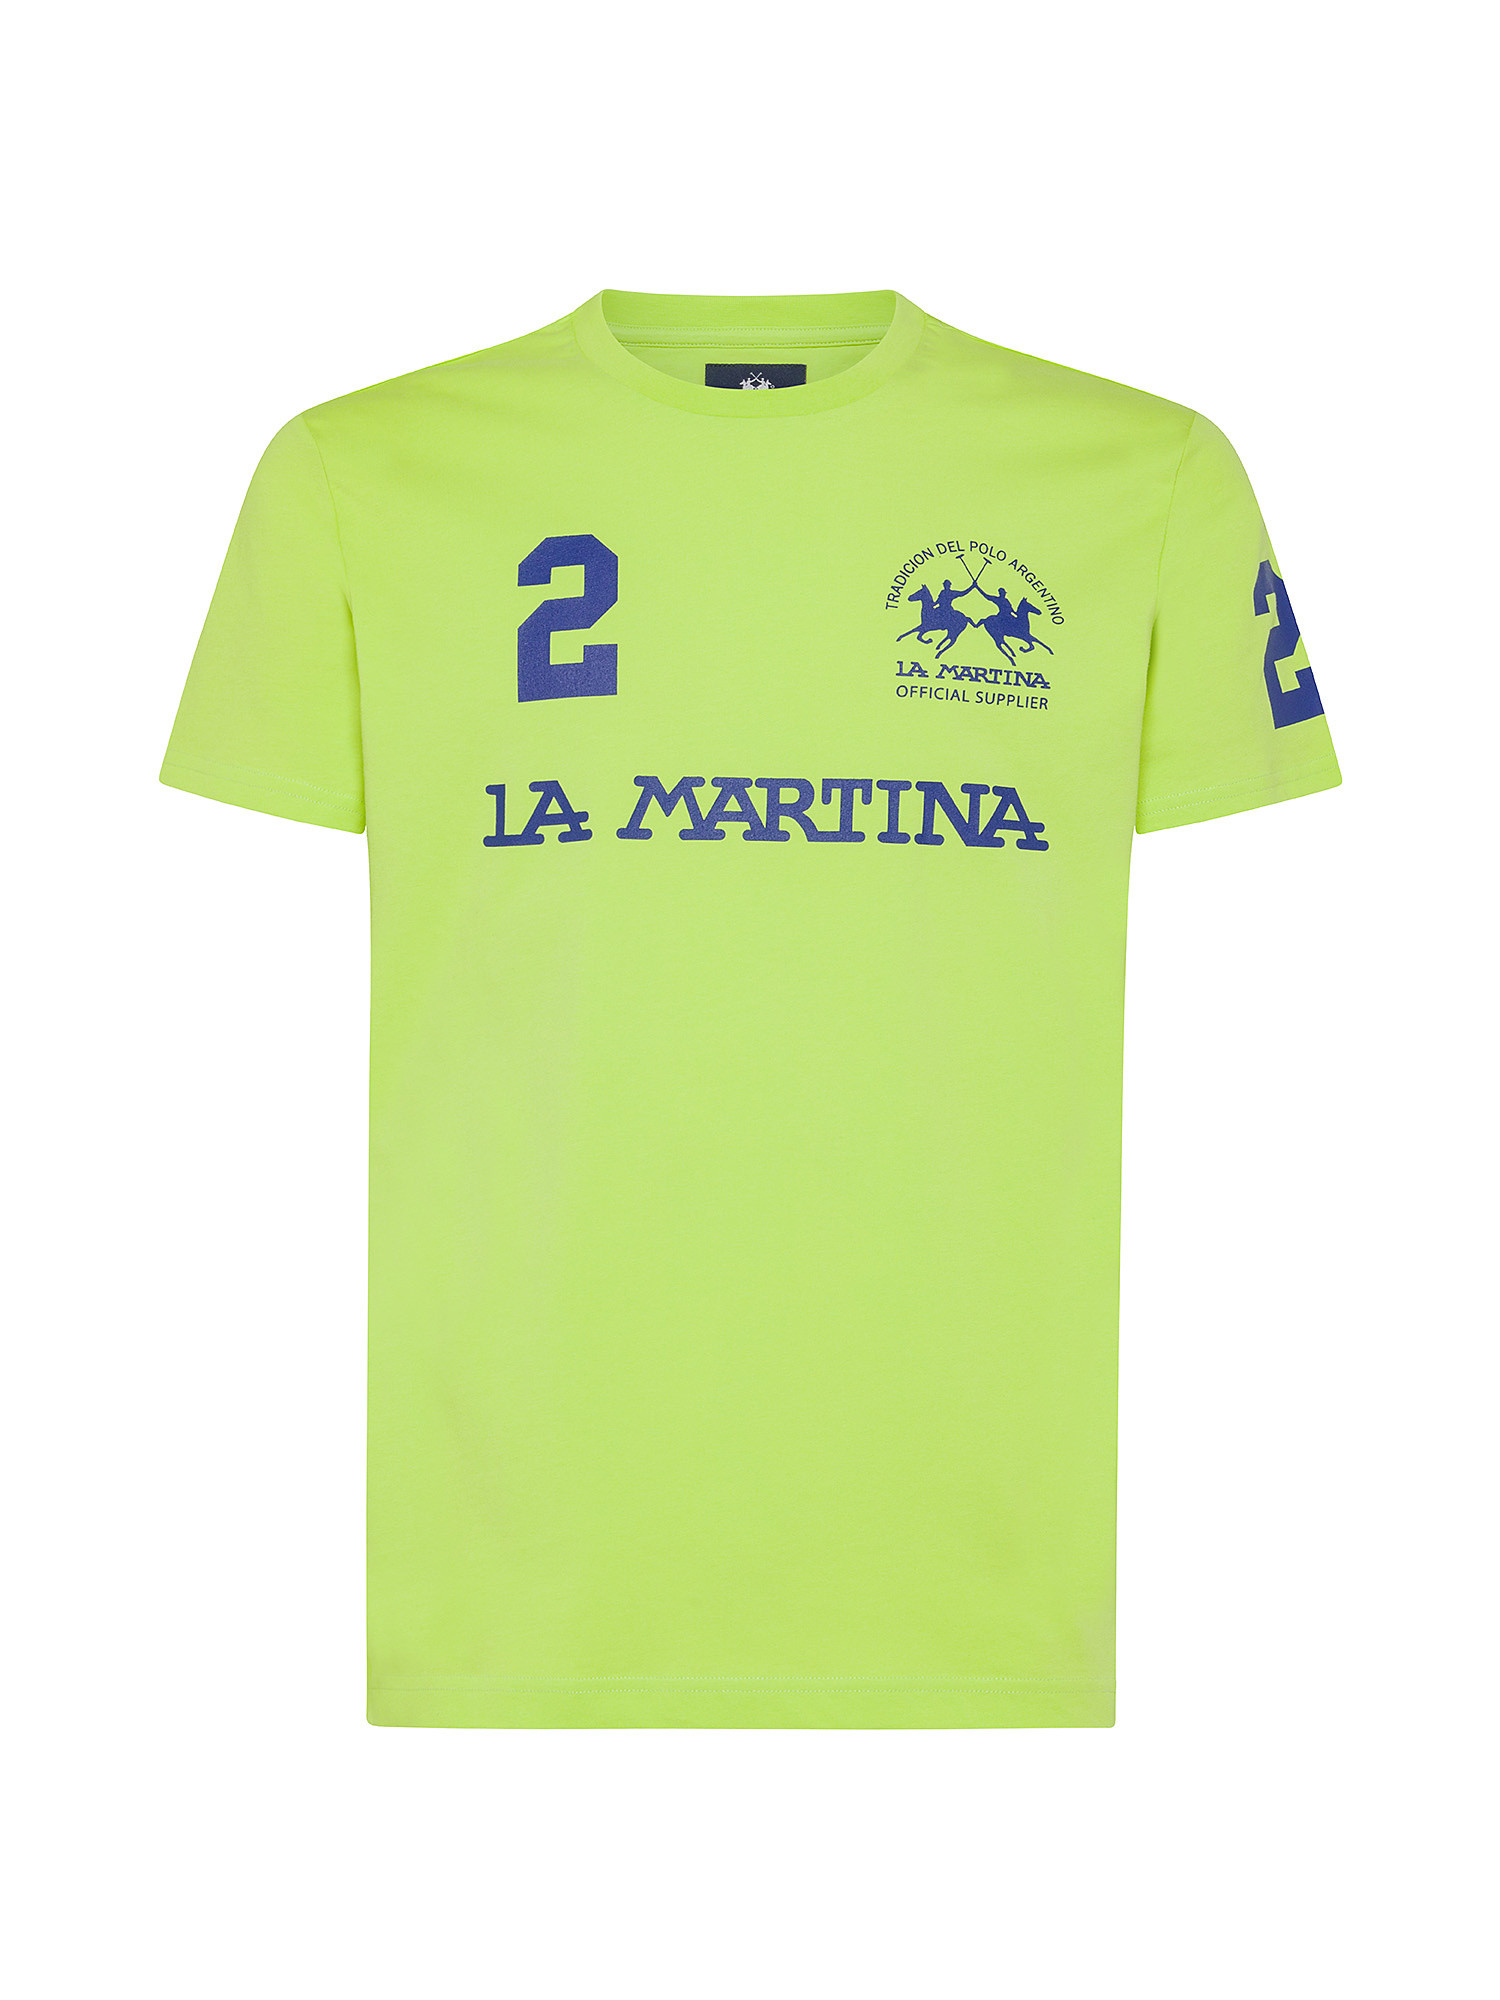 La Martina - T-shirt maniche corte in cotone jersey, Yellow, large image number 0